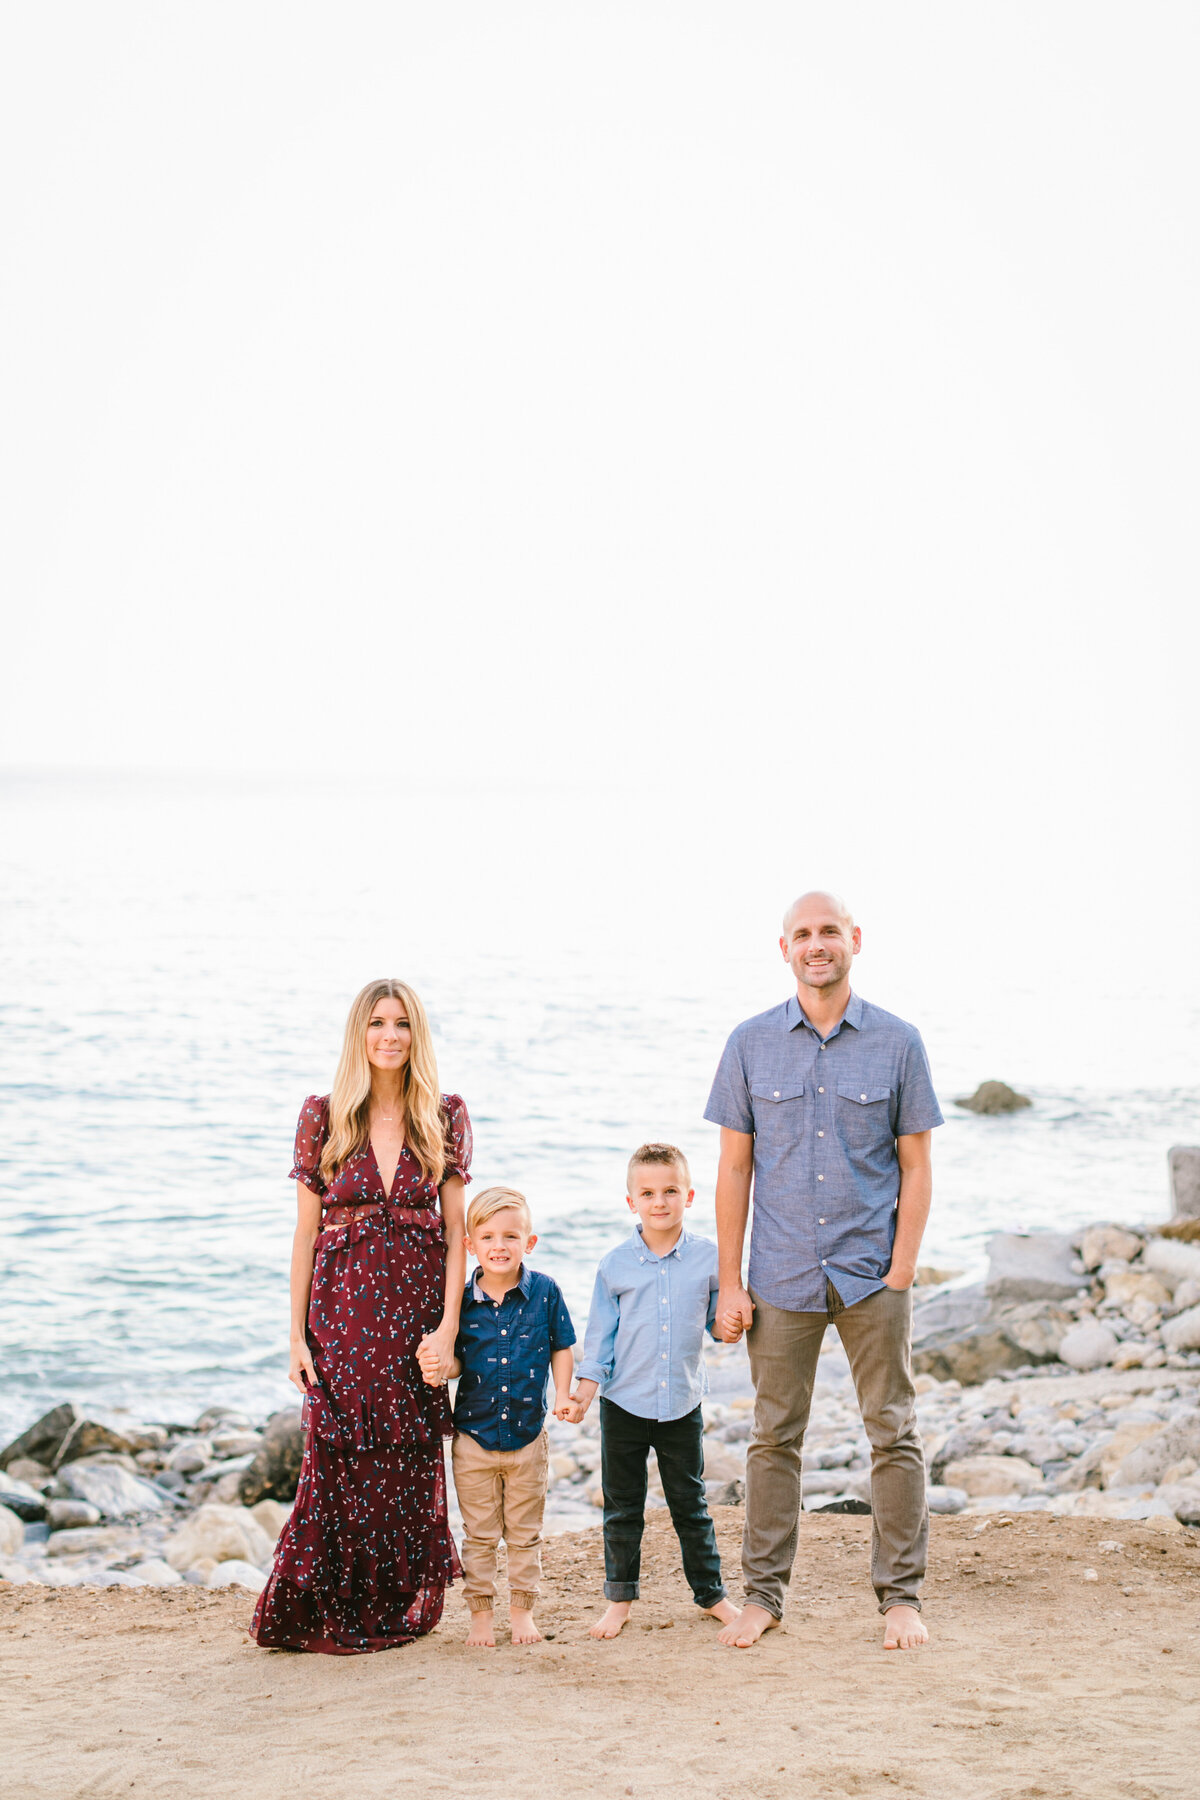 Best California and Texas Family Photographer-Jodee Debes Photography-134